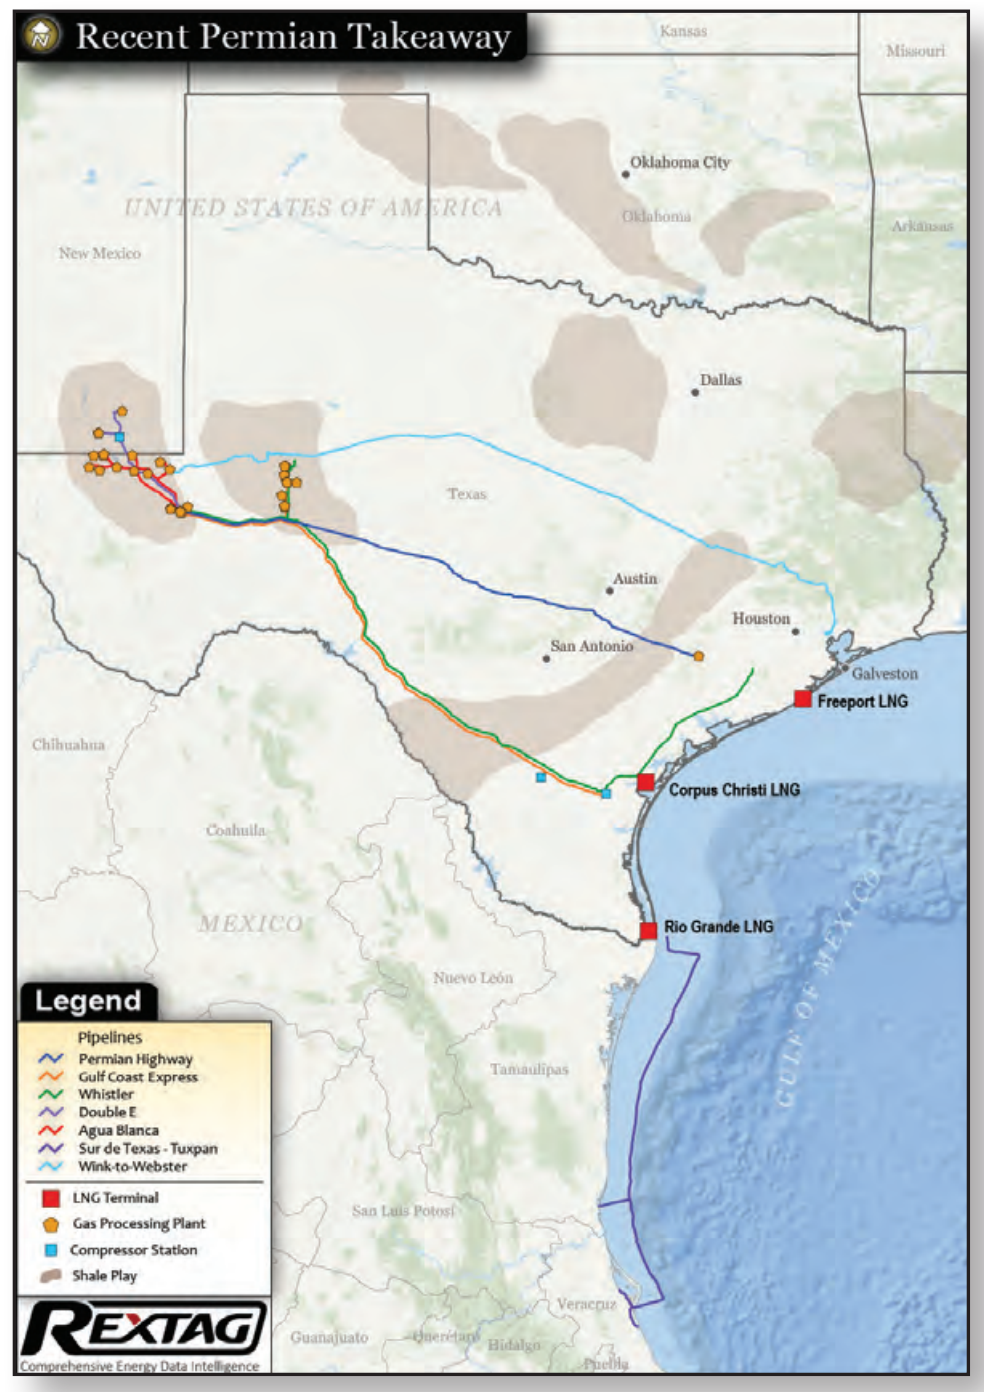 Recent Permian Takeaway Rextag Map - Midstream Business Cover Story Permian Basin Takeaway